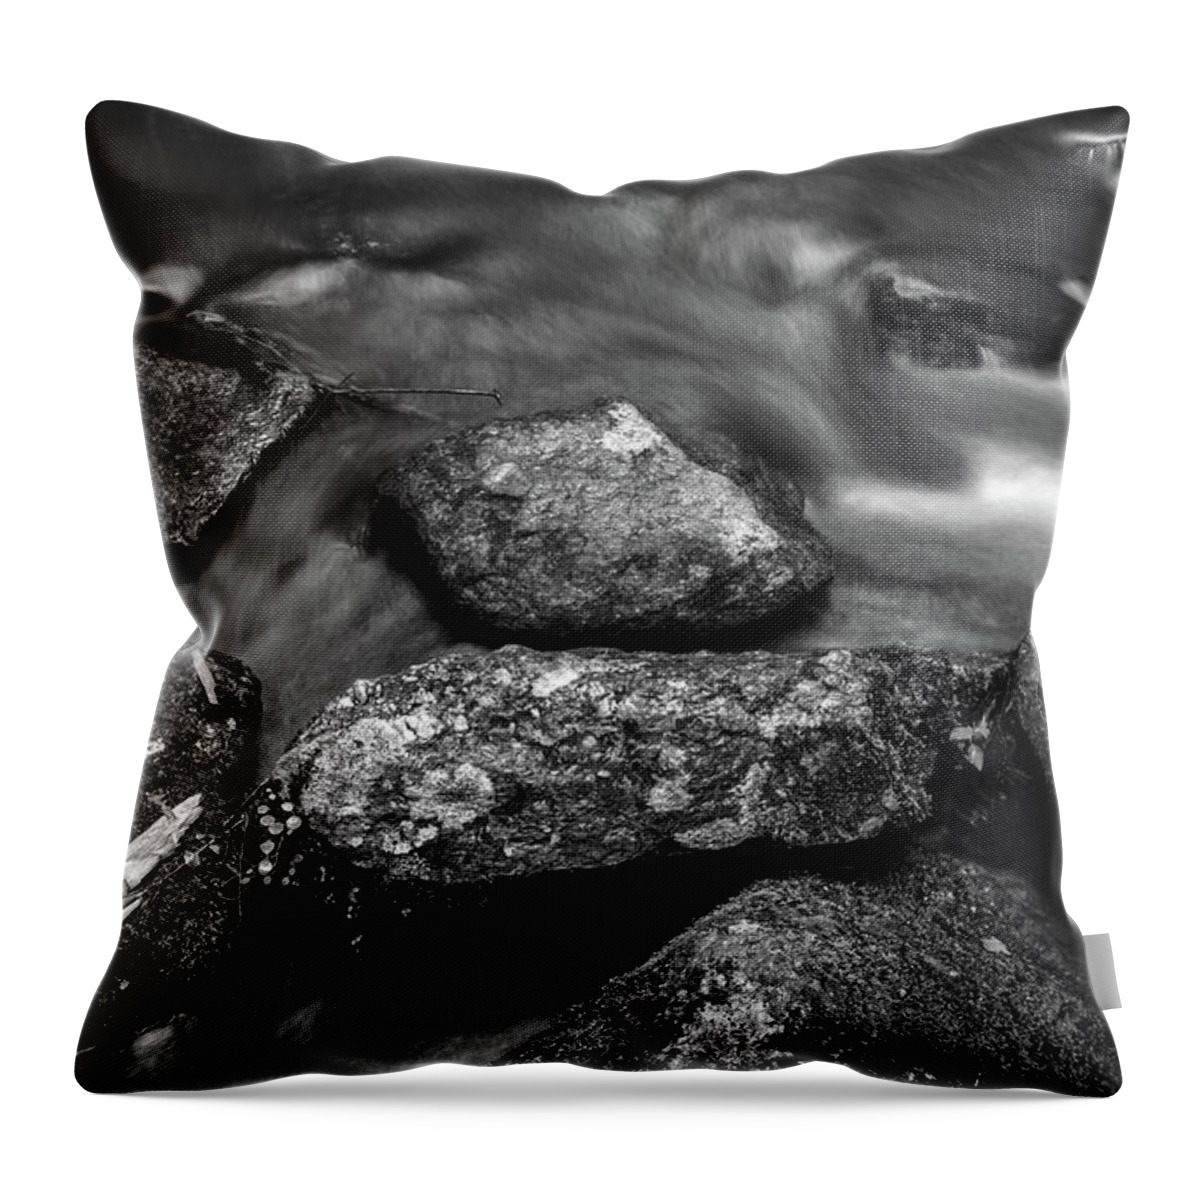 Rocks Throw Pillow featuring the photograph Rocks in Stream Study 1 by Lindsay Garrett